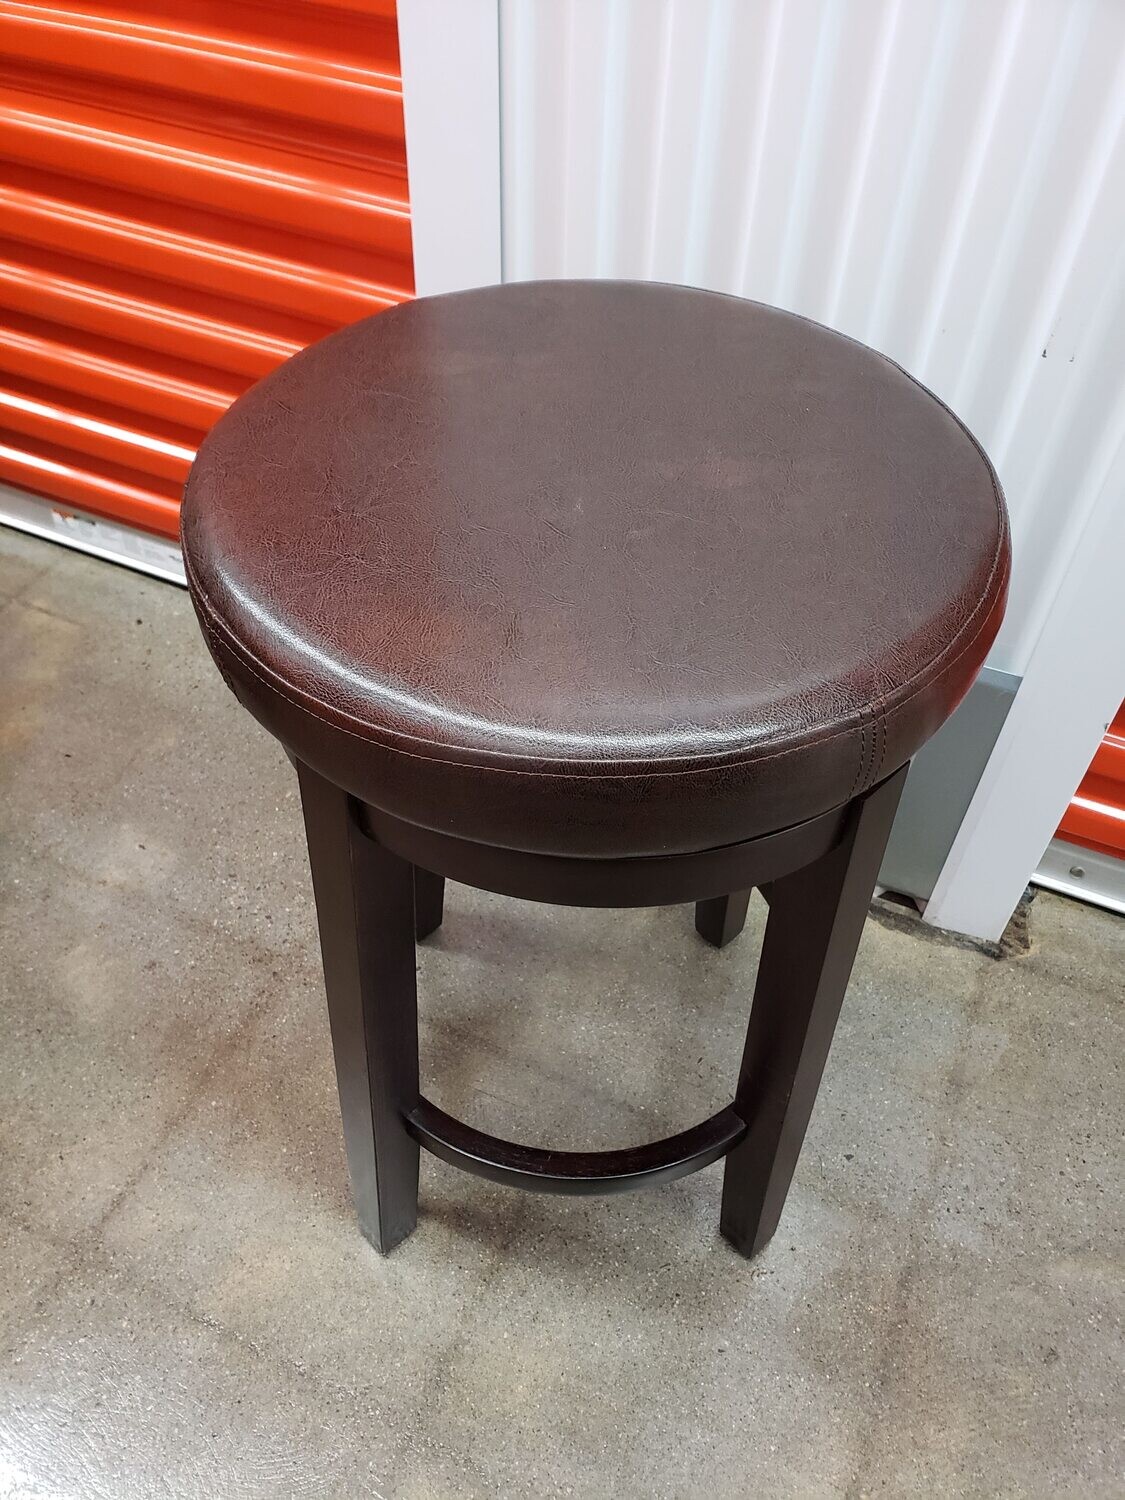 Stool with Faux Leather Seat #1149 ** 8 mos. to sell, clearance